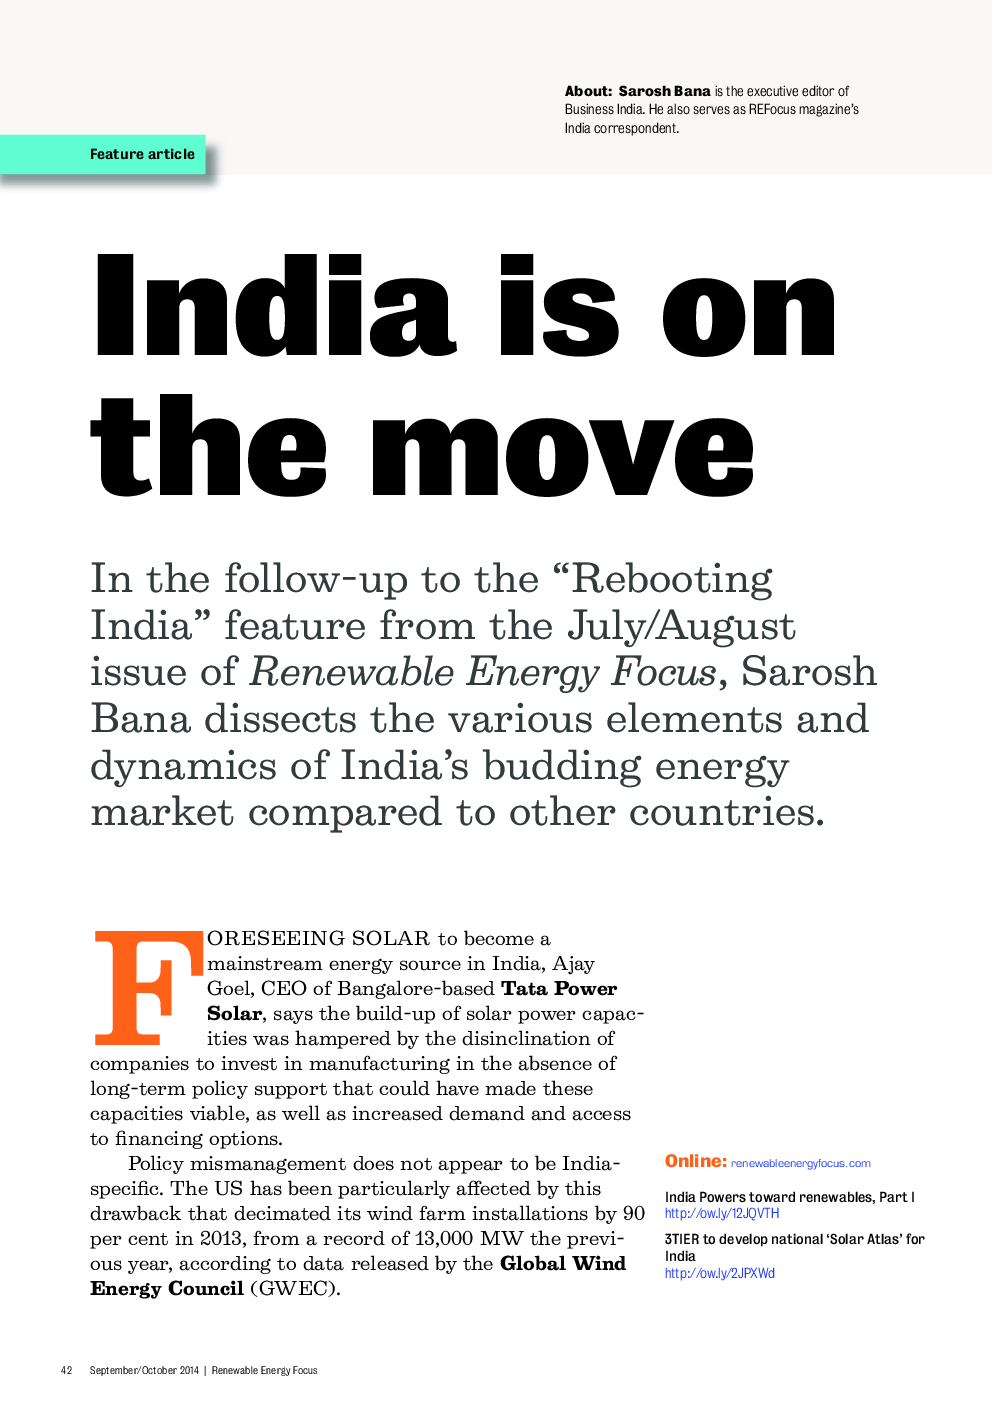 India is on the move